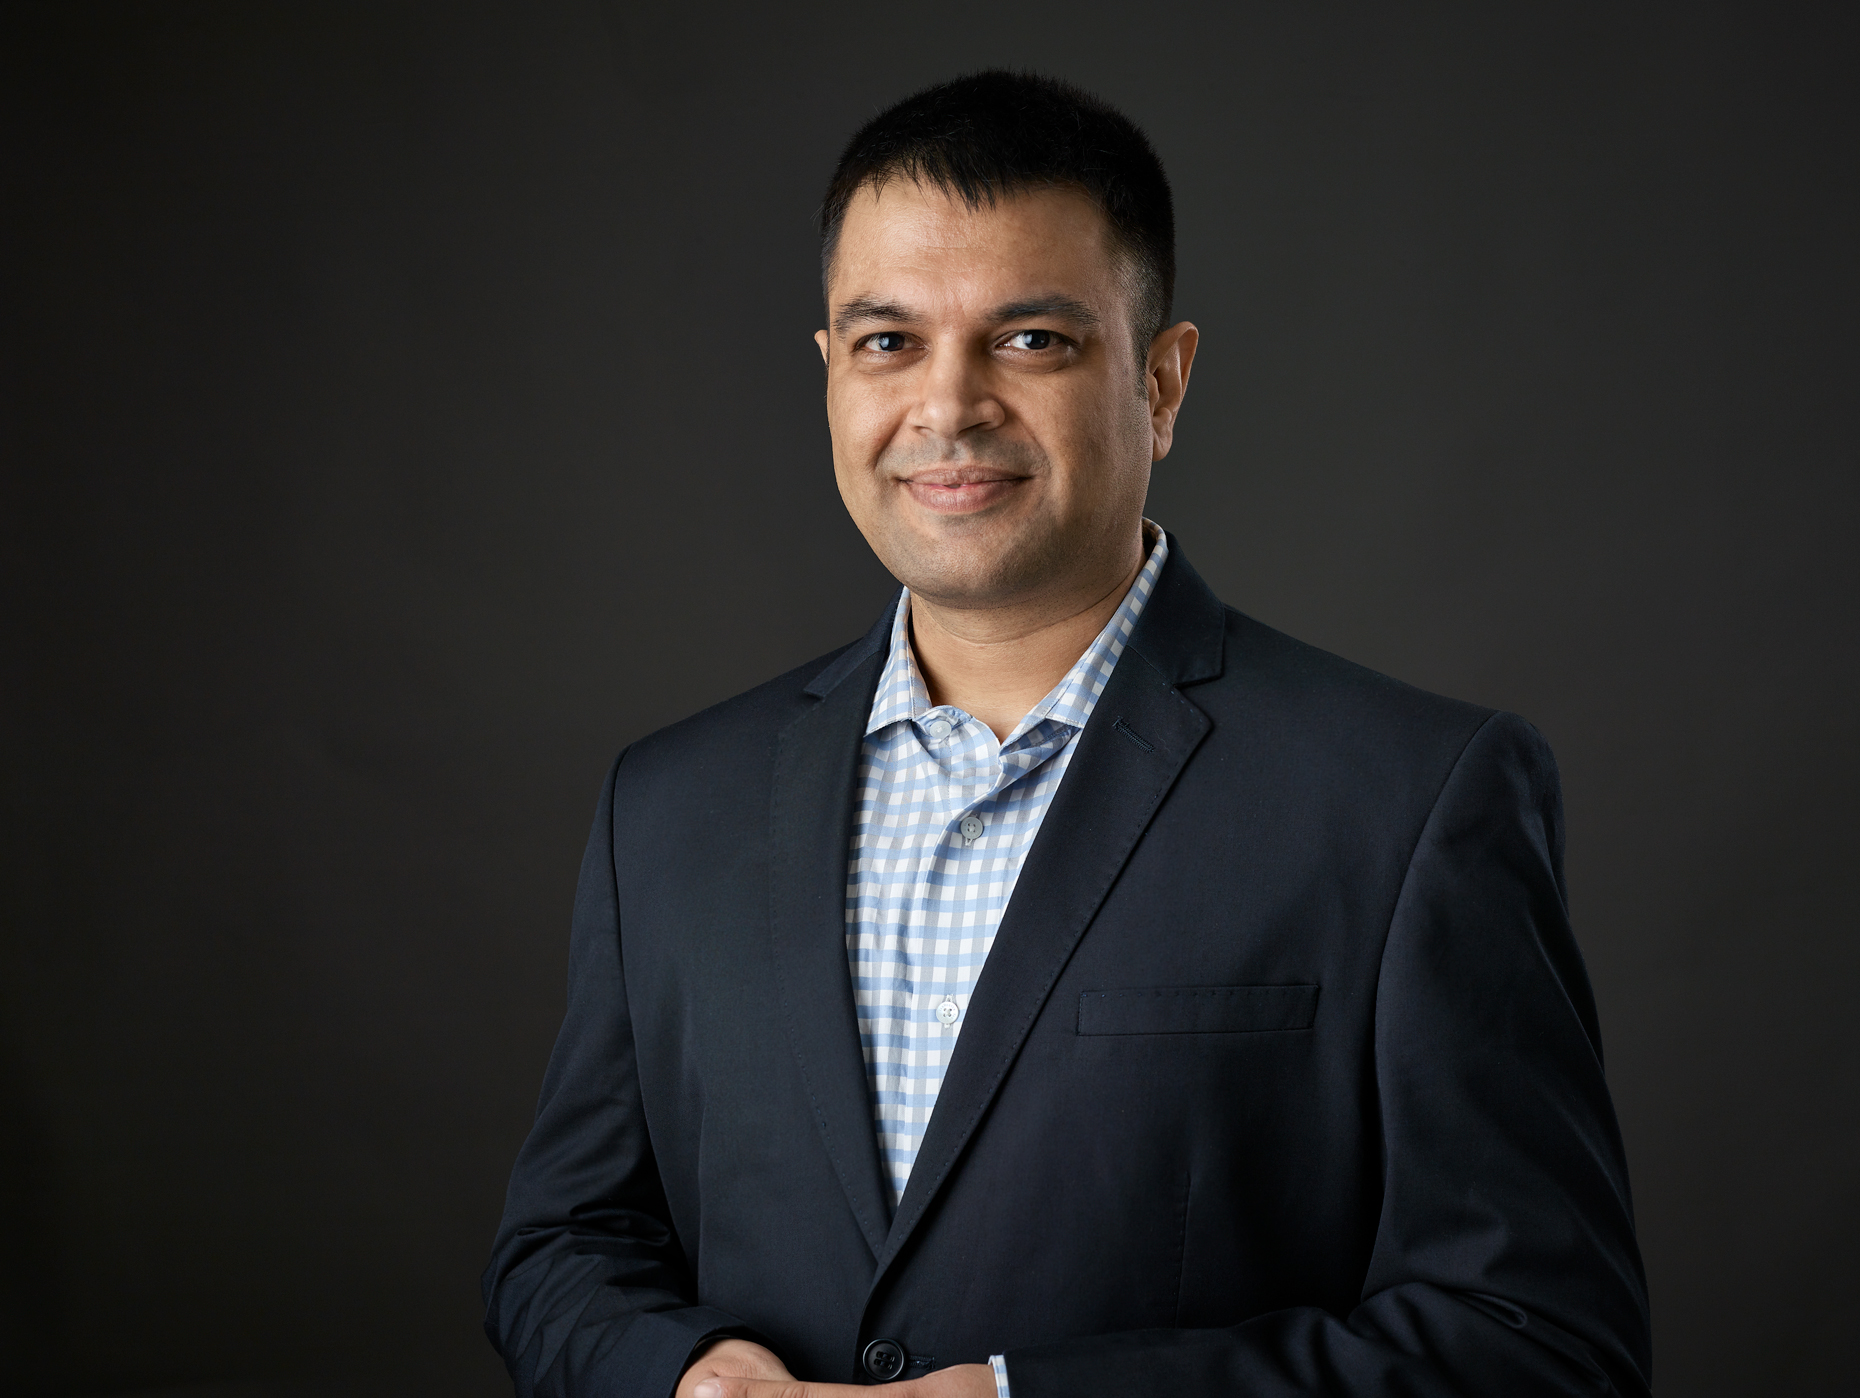 Professional Executive Image of an entrepreneur By Arindom Chowdhury